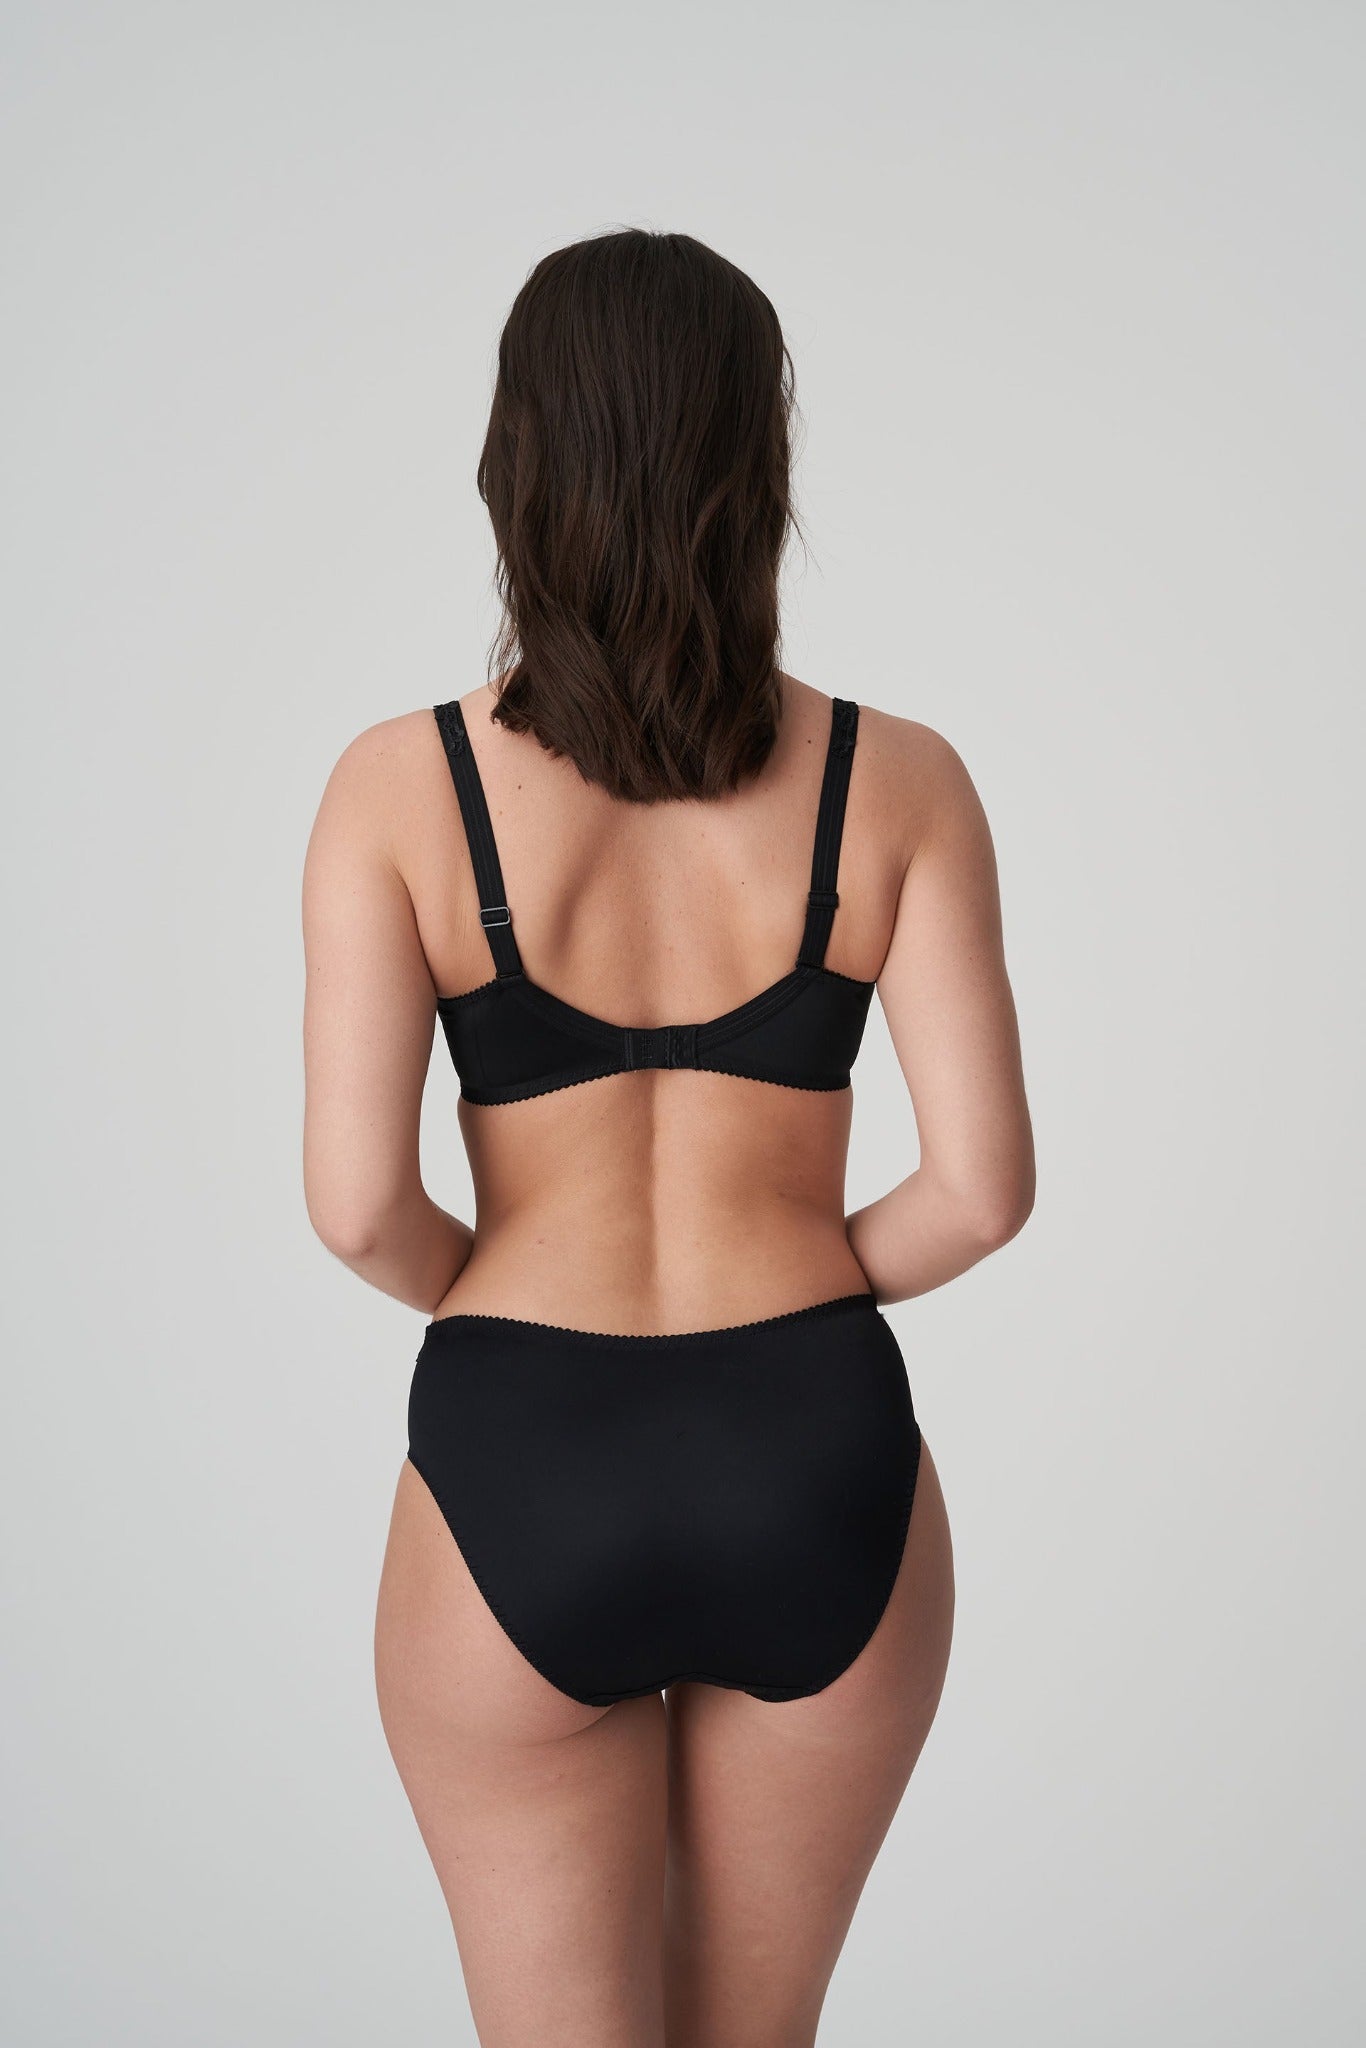 Back view of a woman wearing the Deauville full cup bra paired with the Deauville high-waisted full brief in Black by Primadonna.